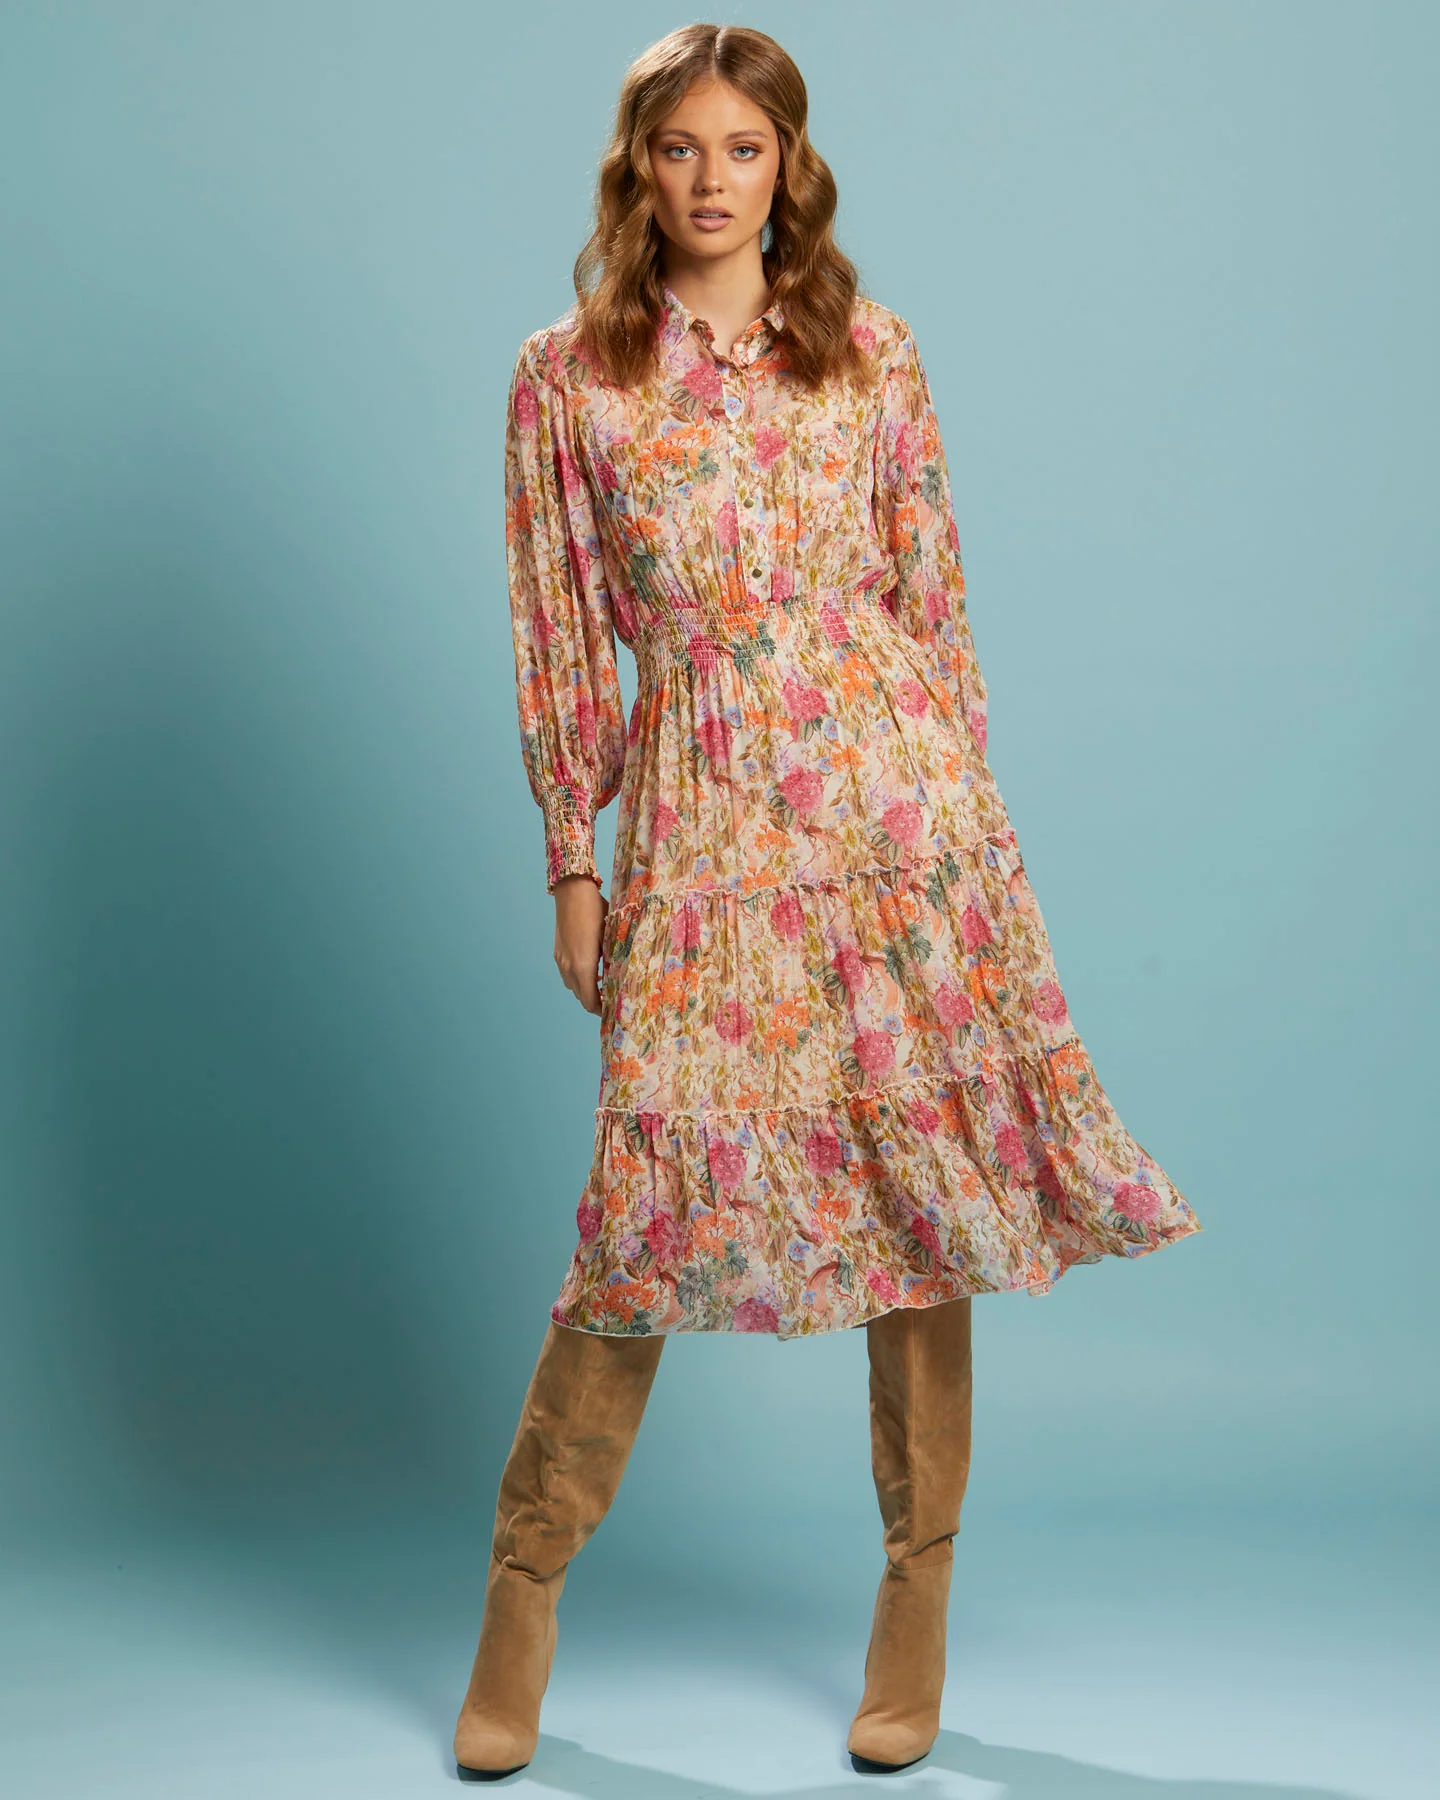 Fate+Becker | Dress - Another Love Midi - Vintage Floral | Expressions